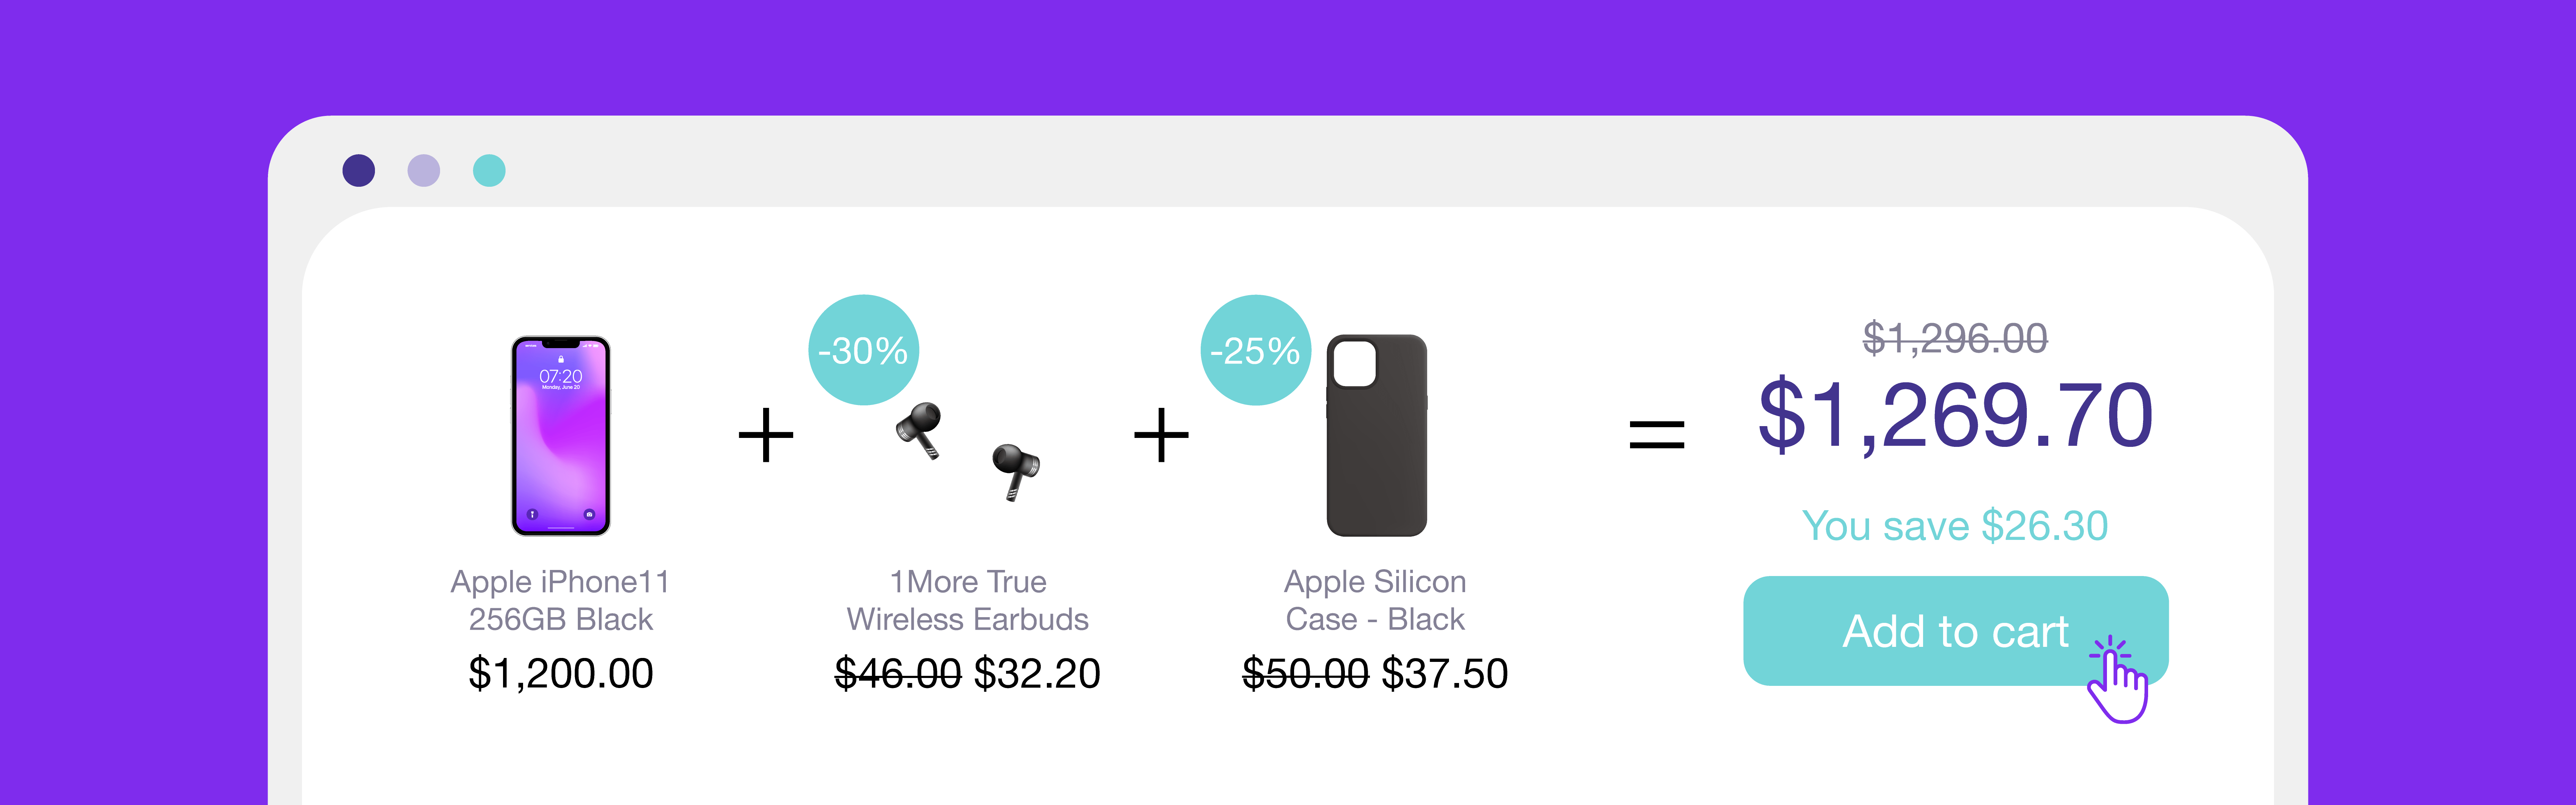 Screenshot of the Frequently Bought Together plugin in action